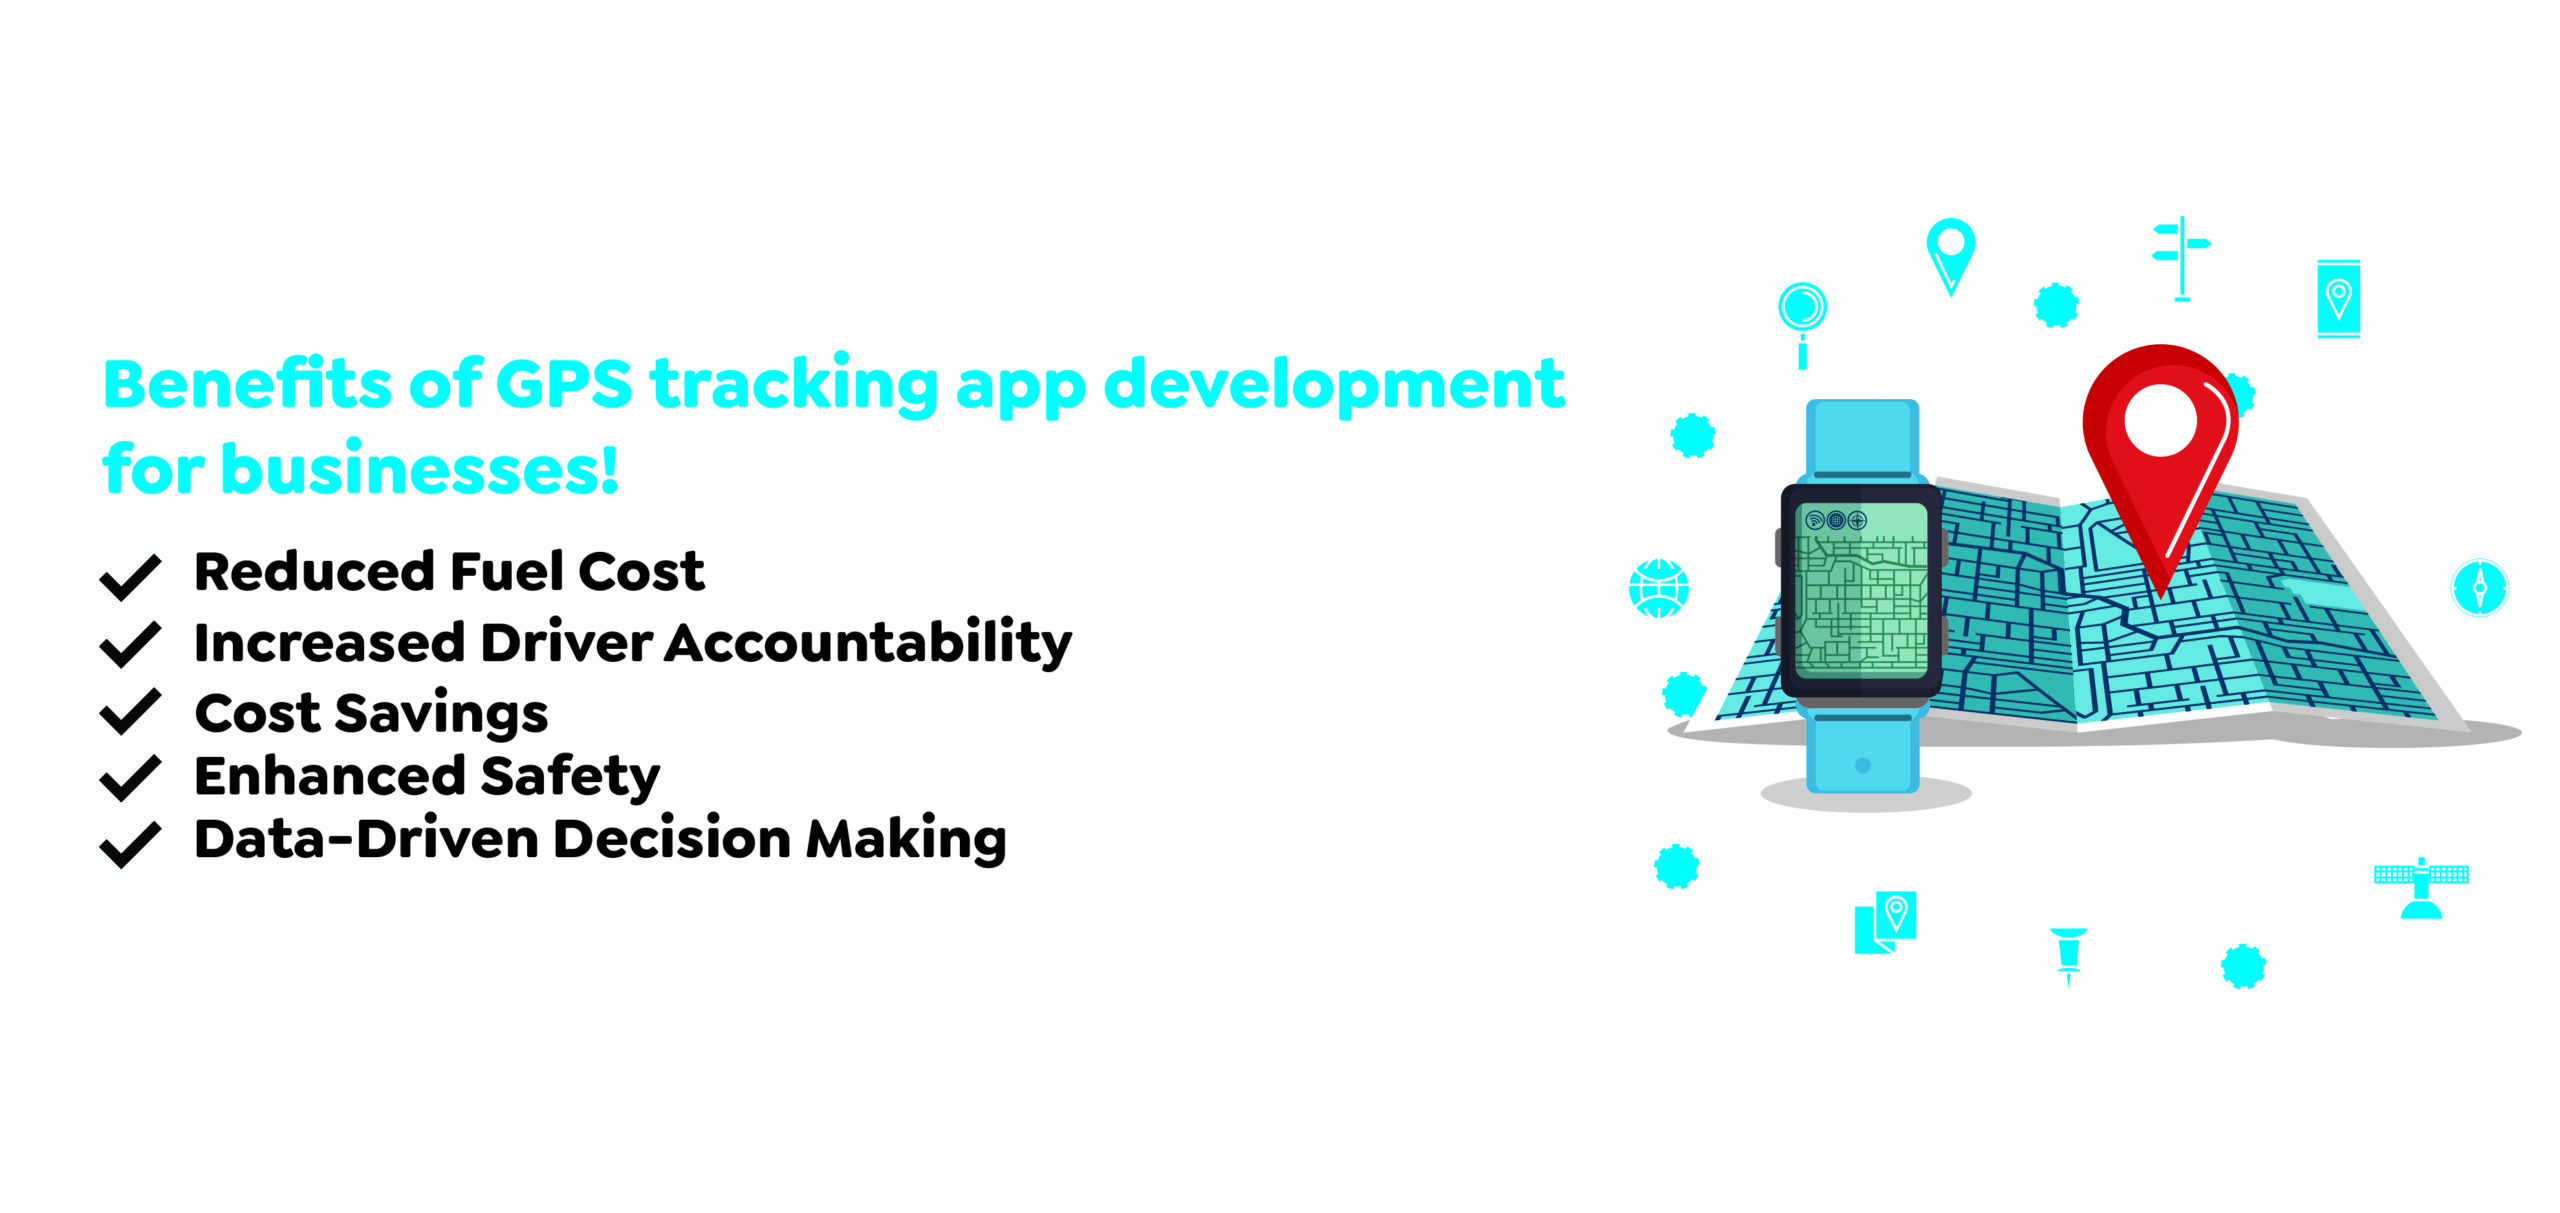 Benefits of GPS tracking app development for businesses!